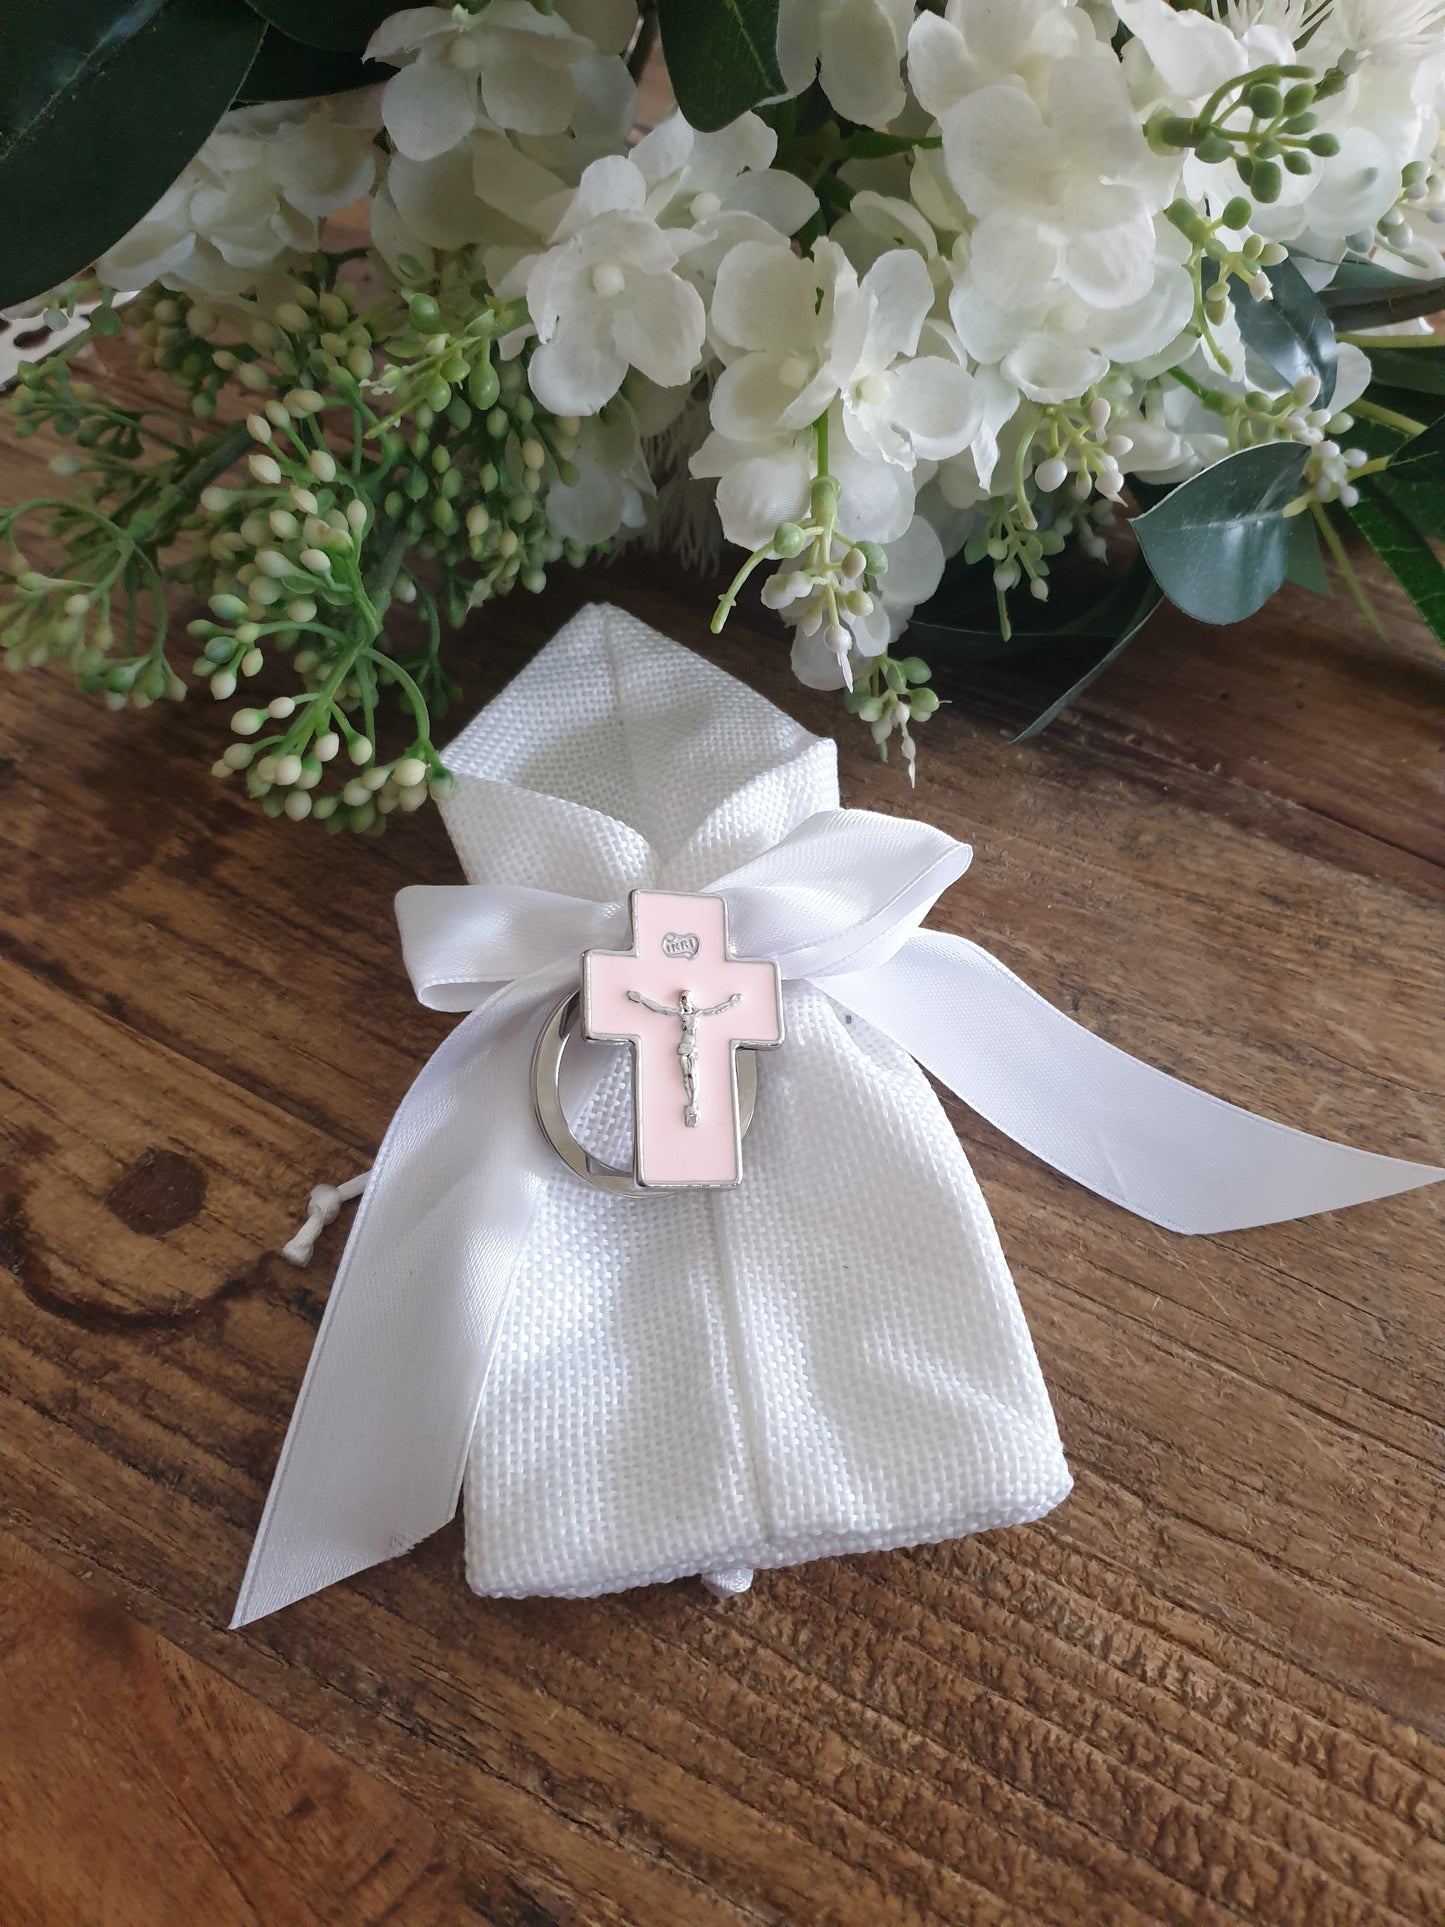 Bomboniere - Cross Keyring  - available in pink, white and baby blue